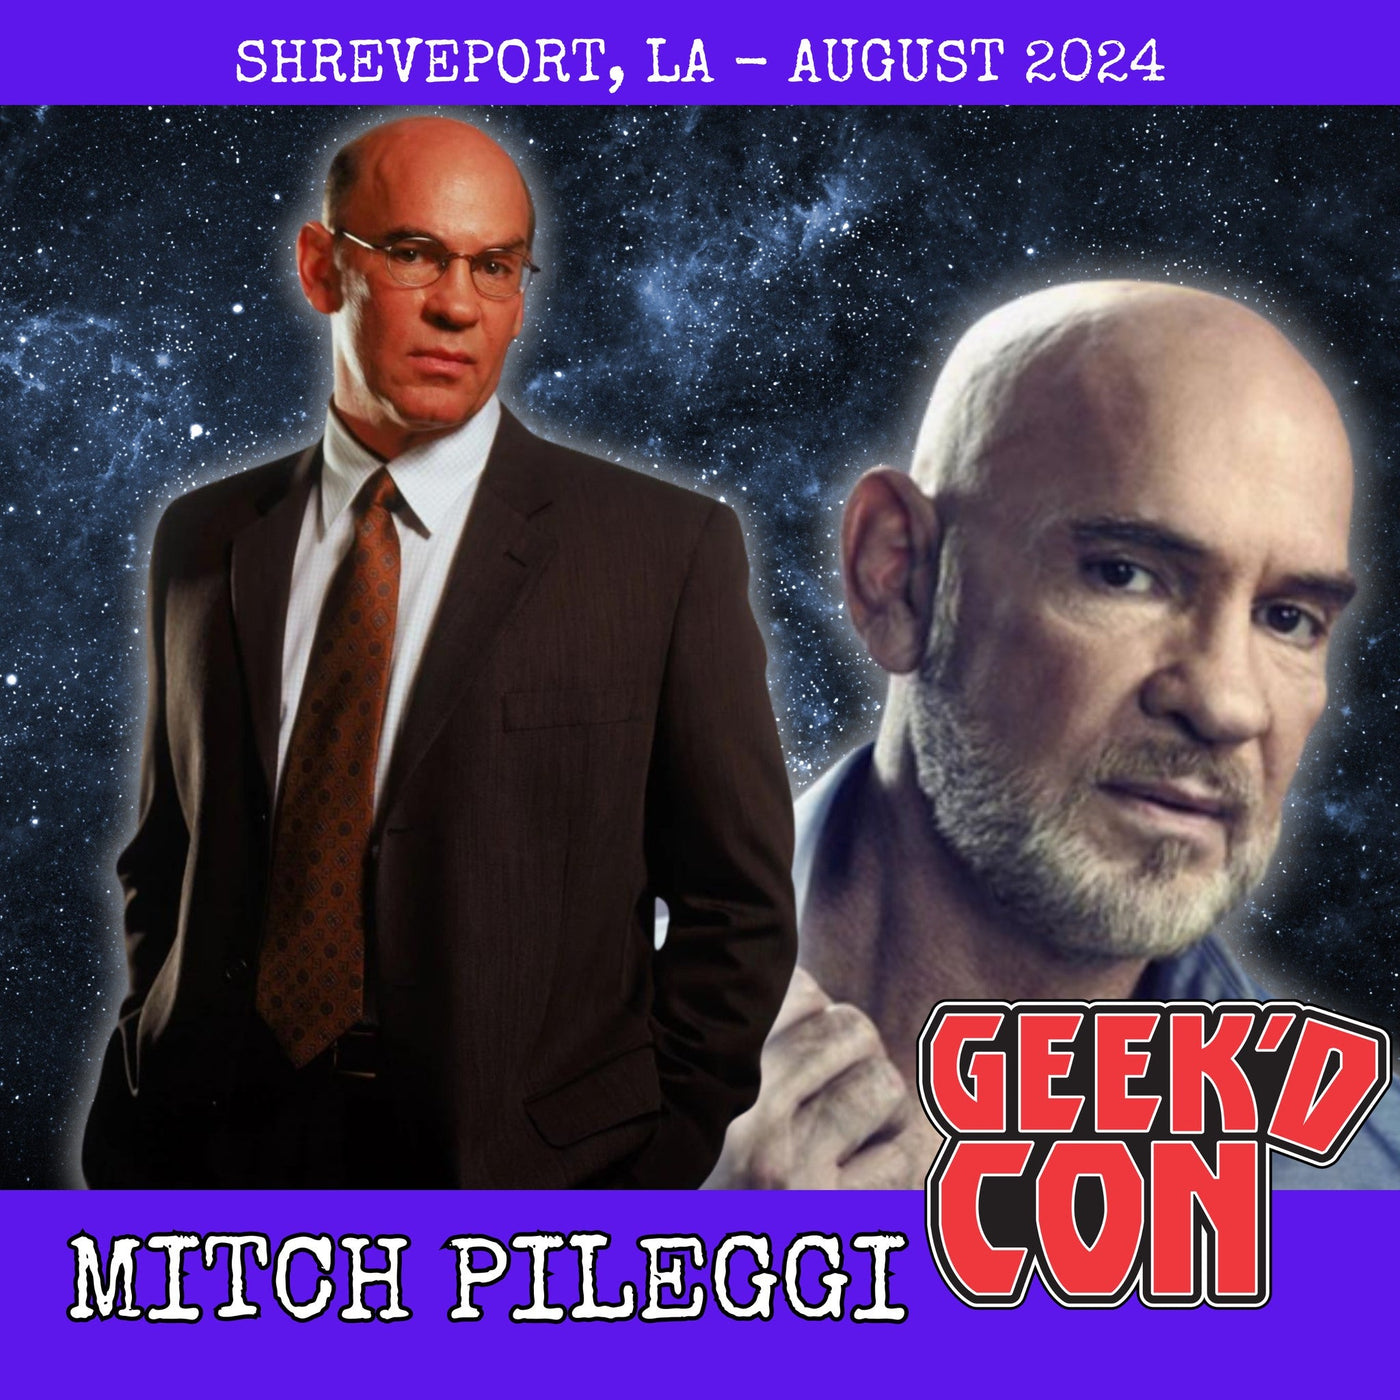 Mitch Pileggi Official Autograph Mail-In Service - Geek'd Con 2024